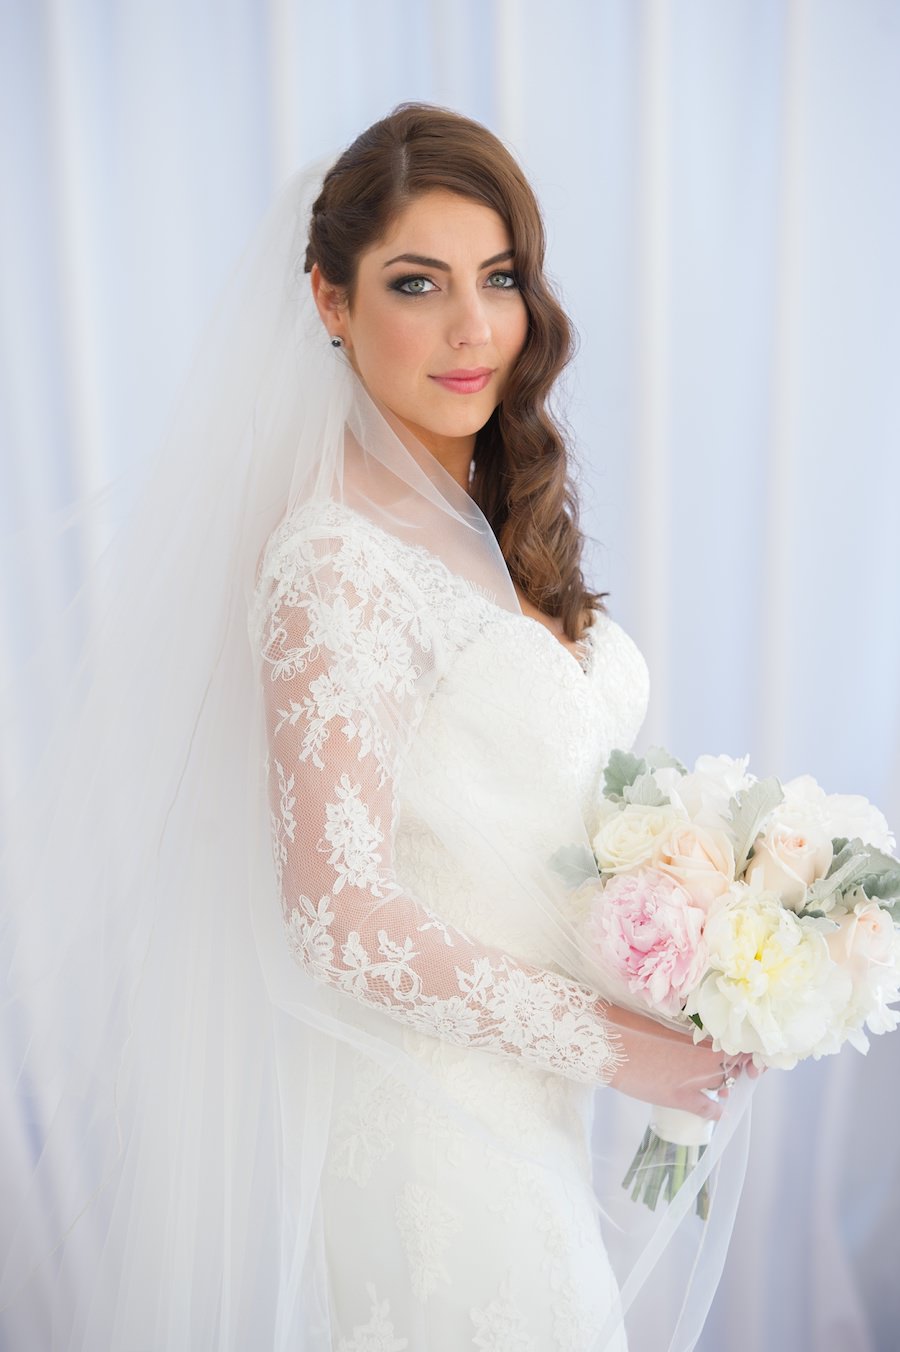 Bridal Wedding Portrait in Ivory, Lace Long Sleeve Wedding Dress and Ivory and Pink Bridal Bouquet | Tampa Wedding Photographer Andi Diamond Photography